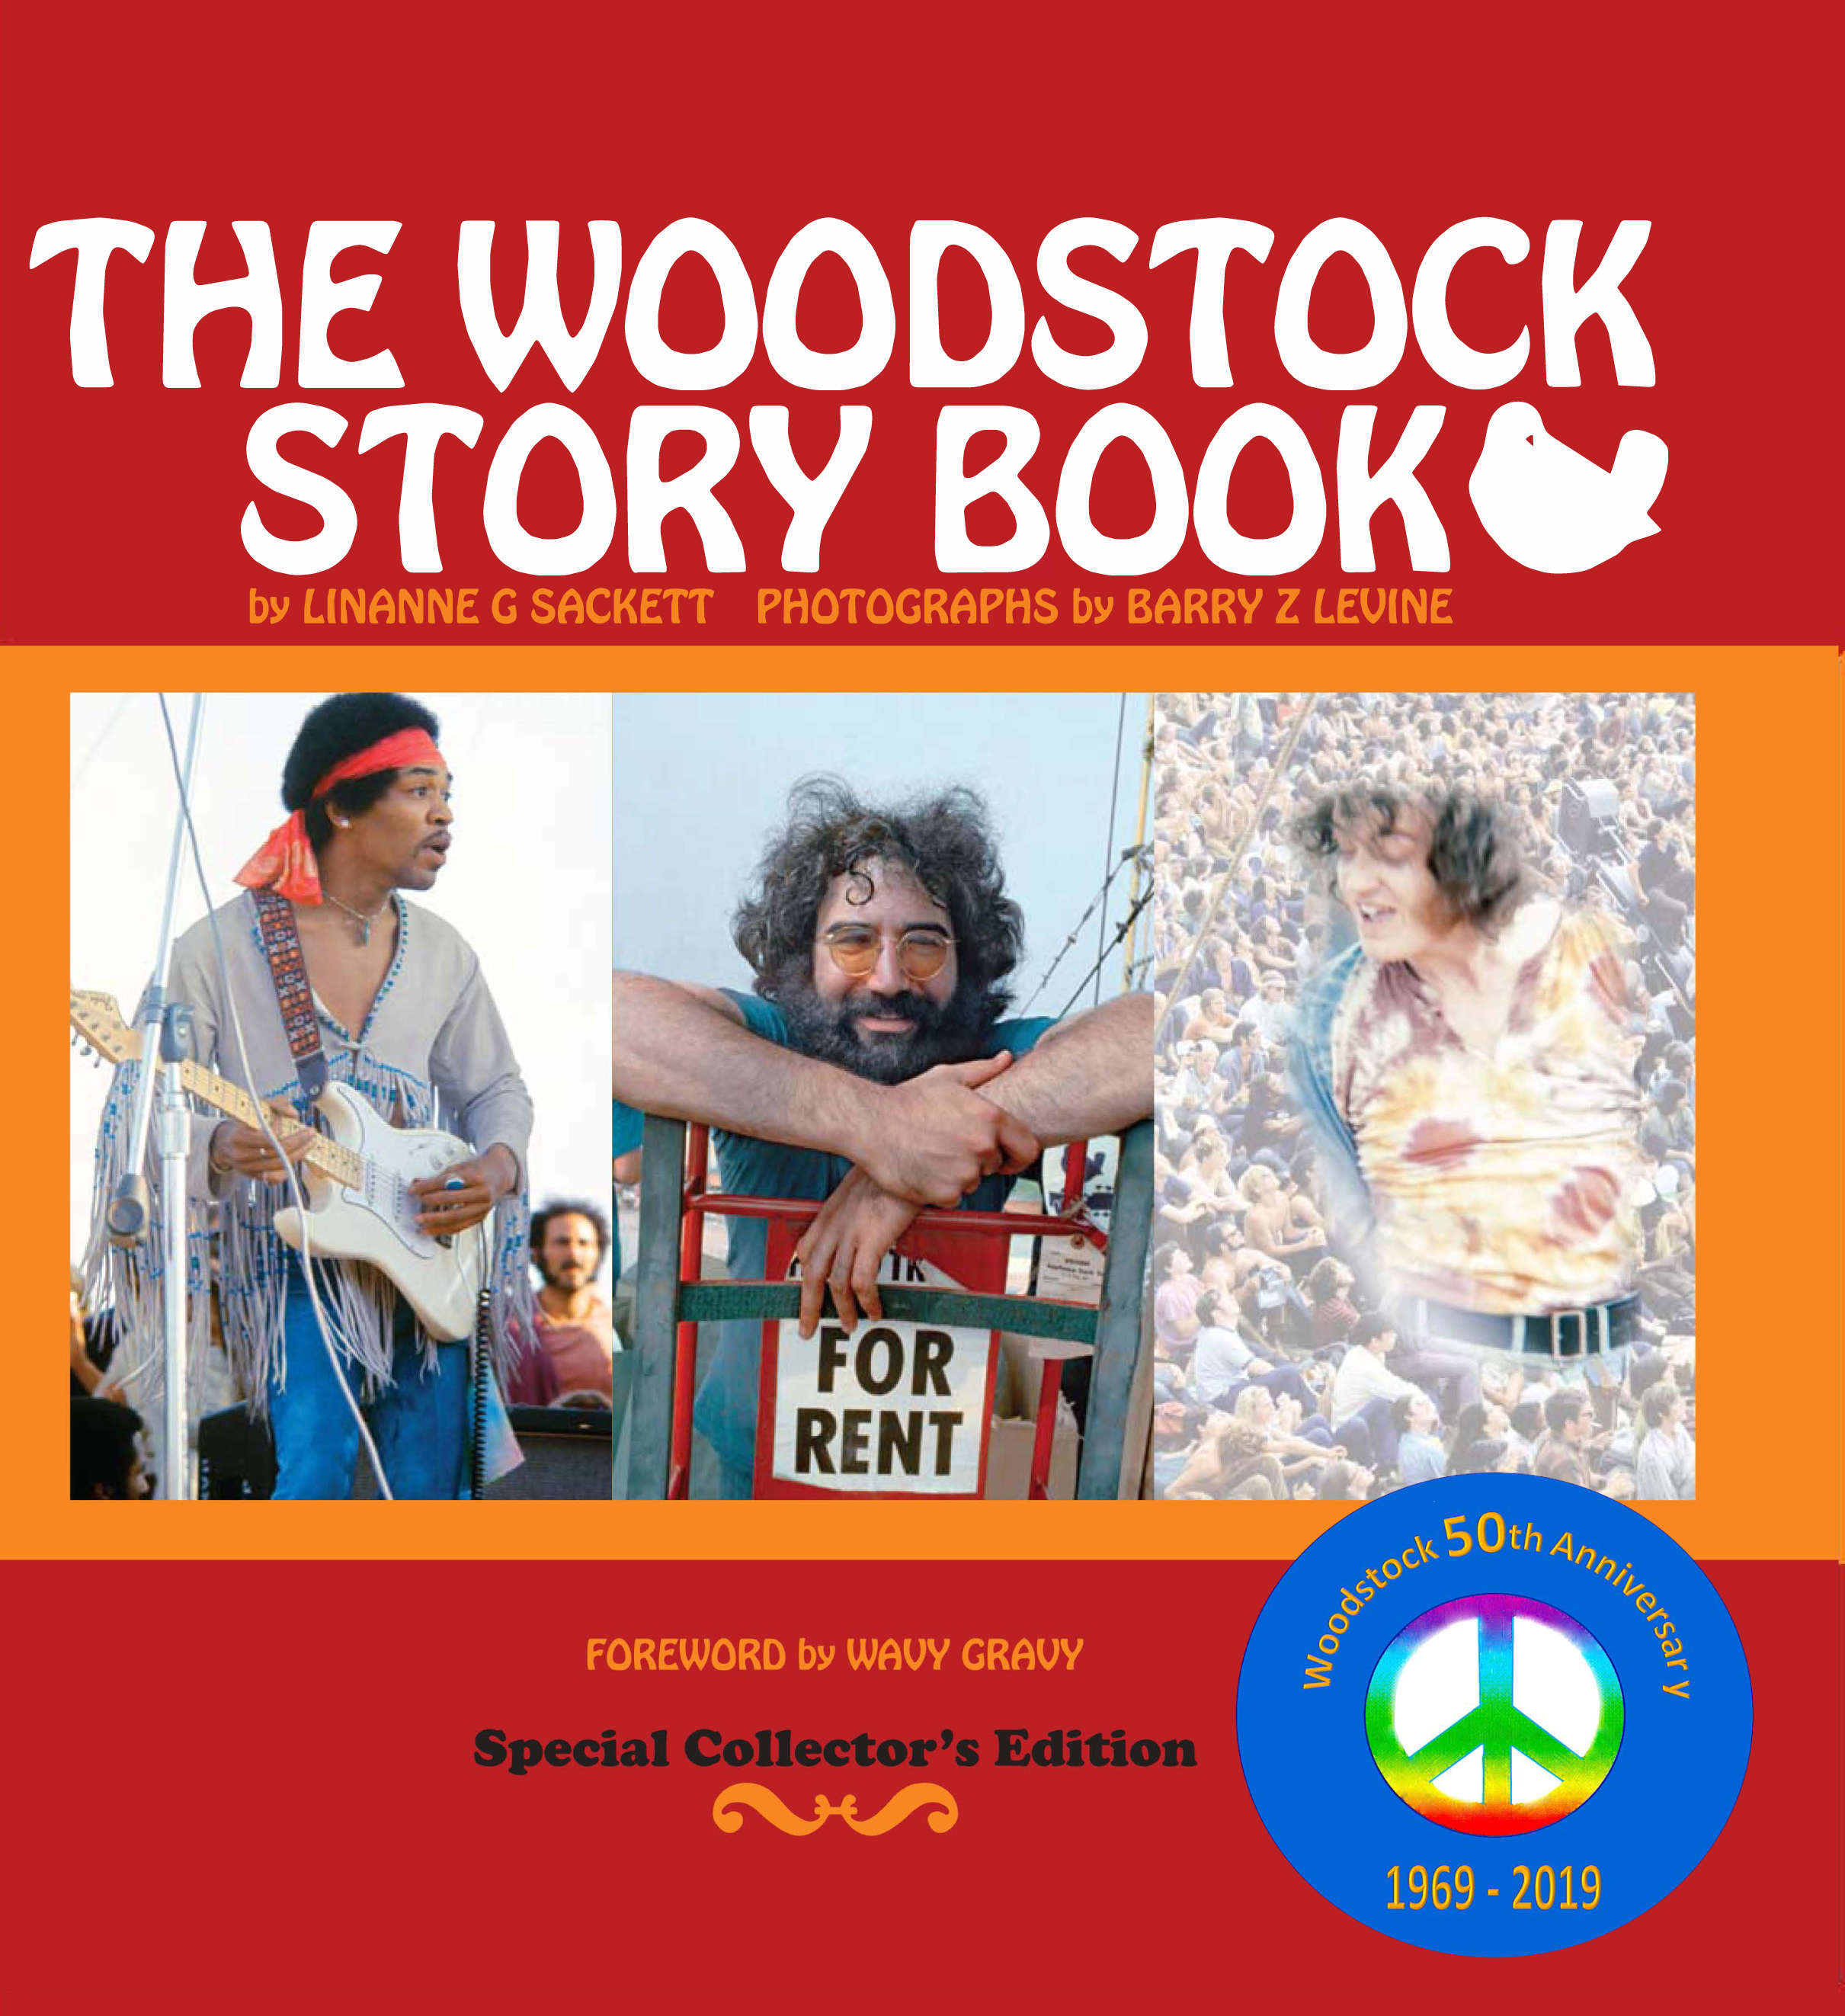 a Book Commemorating the Woodstock Festival 1969, Copyright Barry Z Levine and Linanne G Sackett all rights reserved